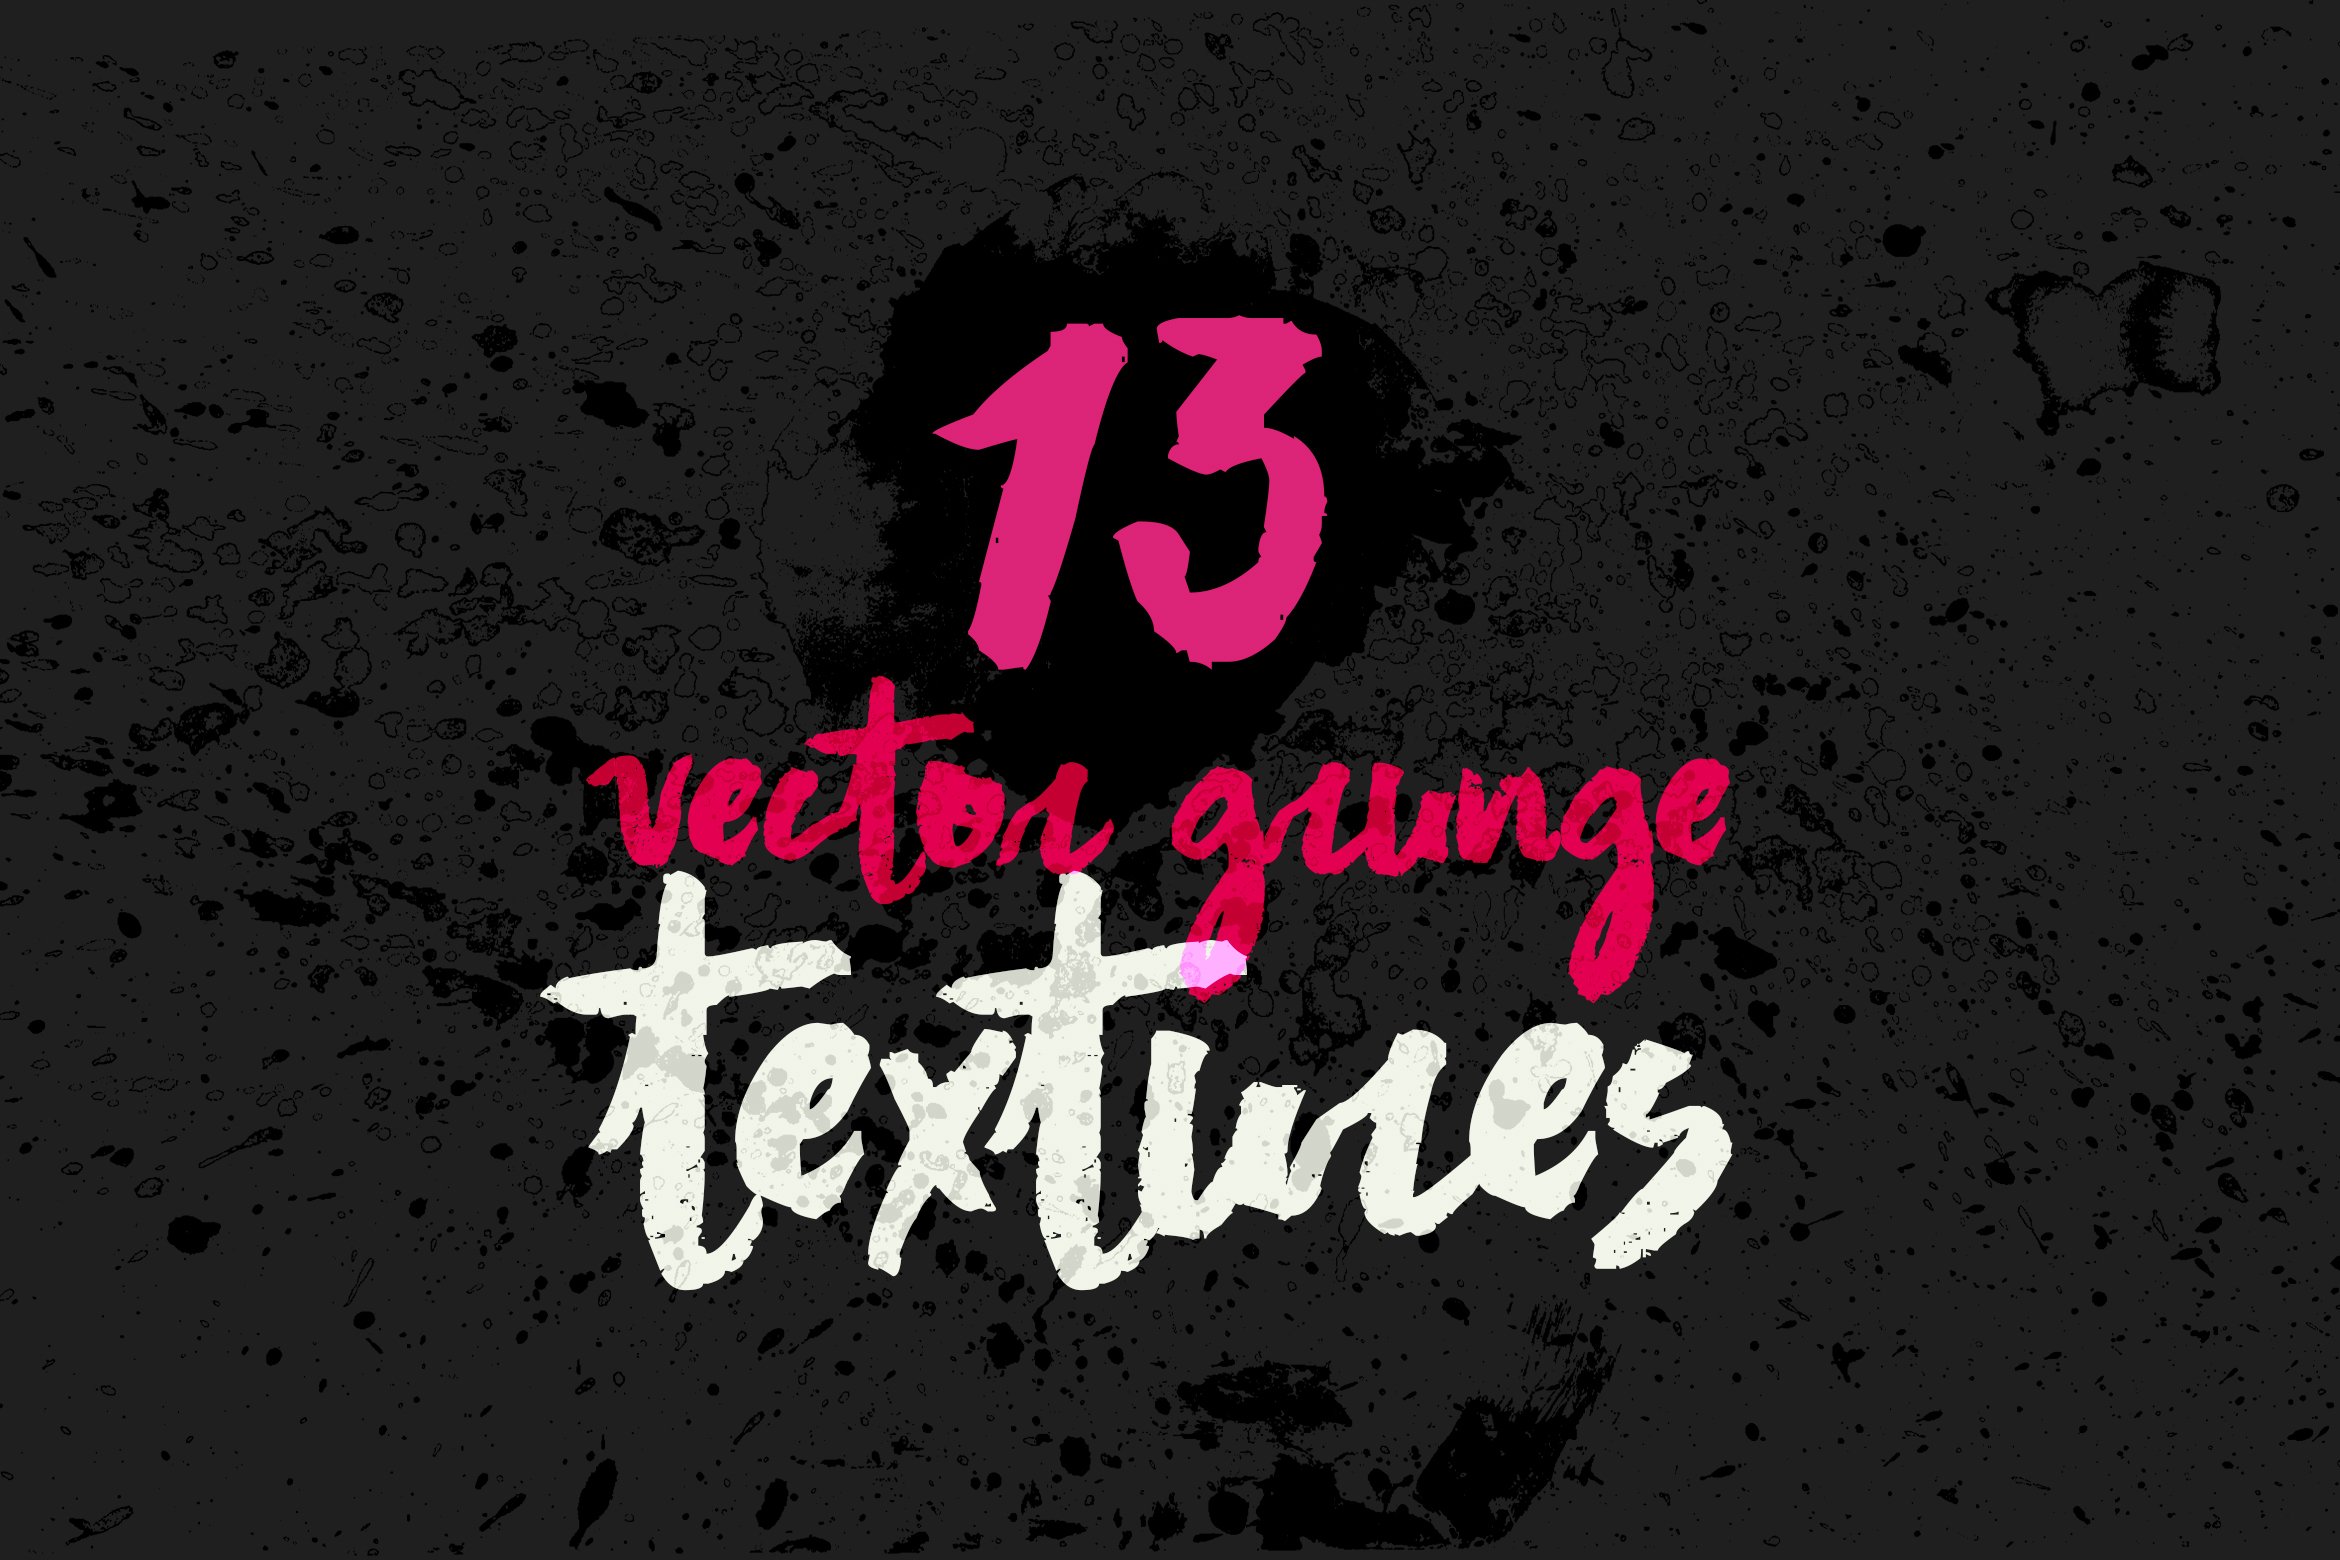 Grunge Textures cover image.